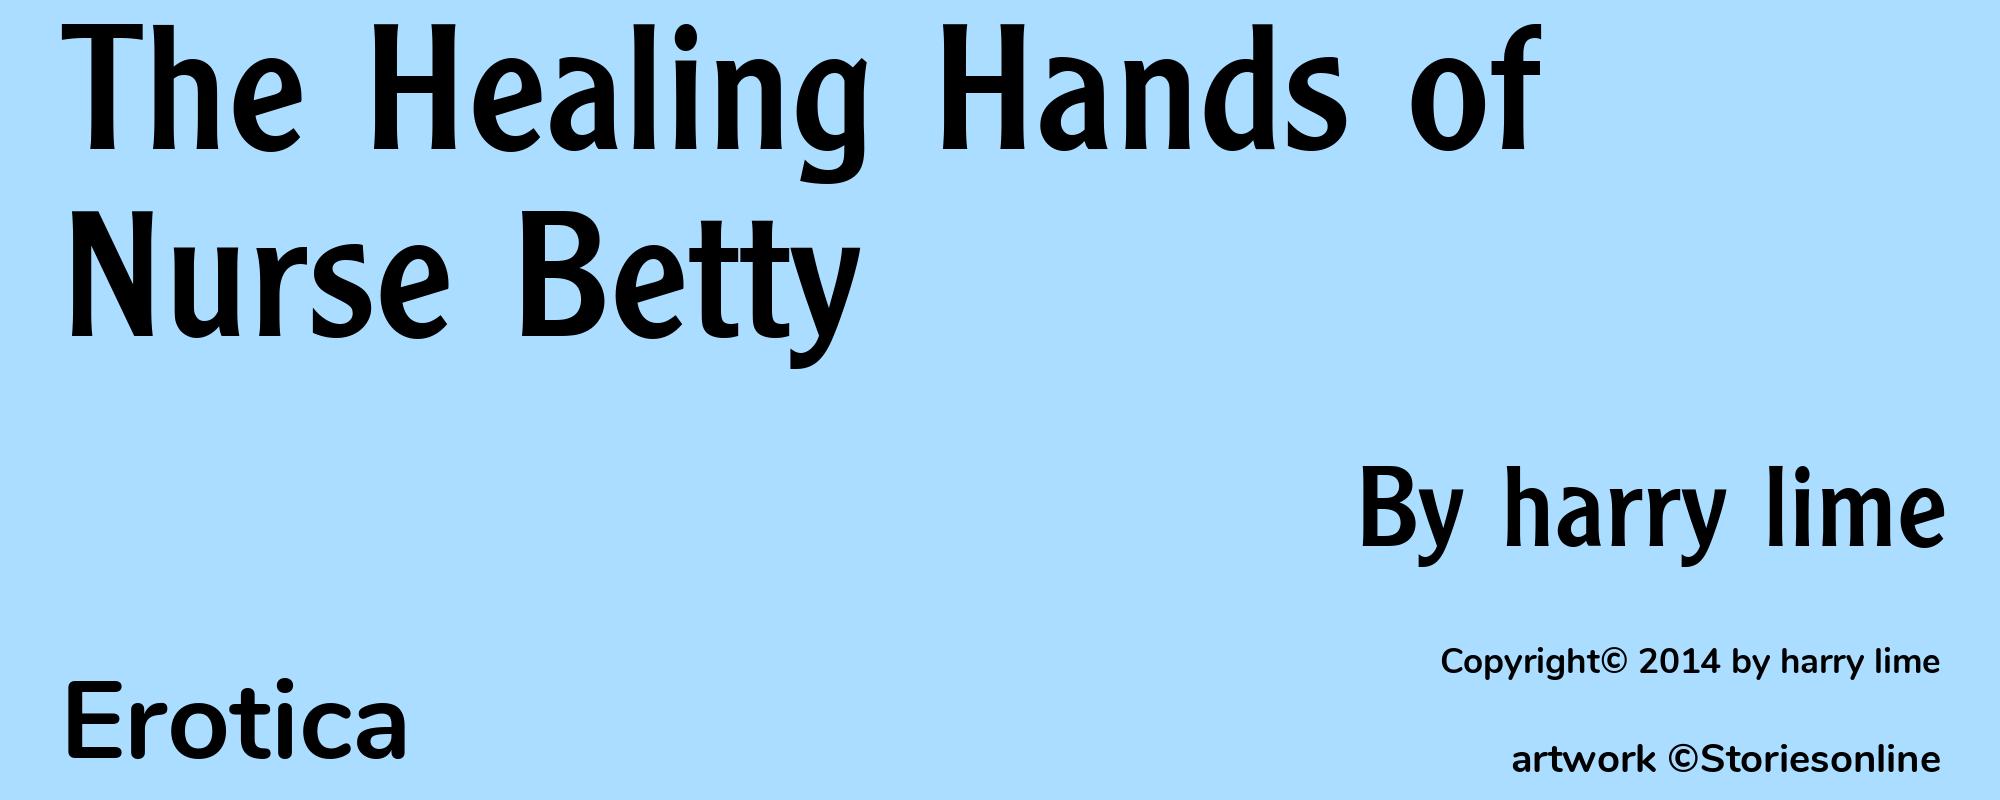 The Healing Hands of Nurse Betty - Cover